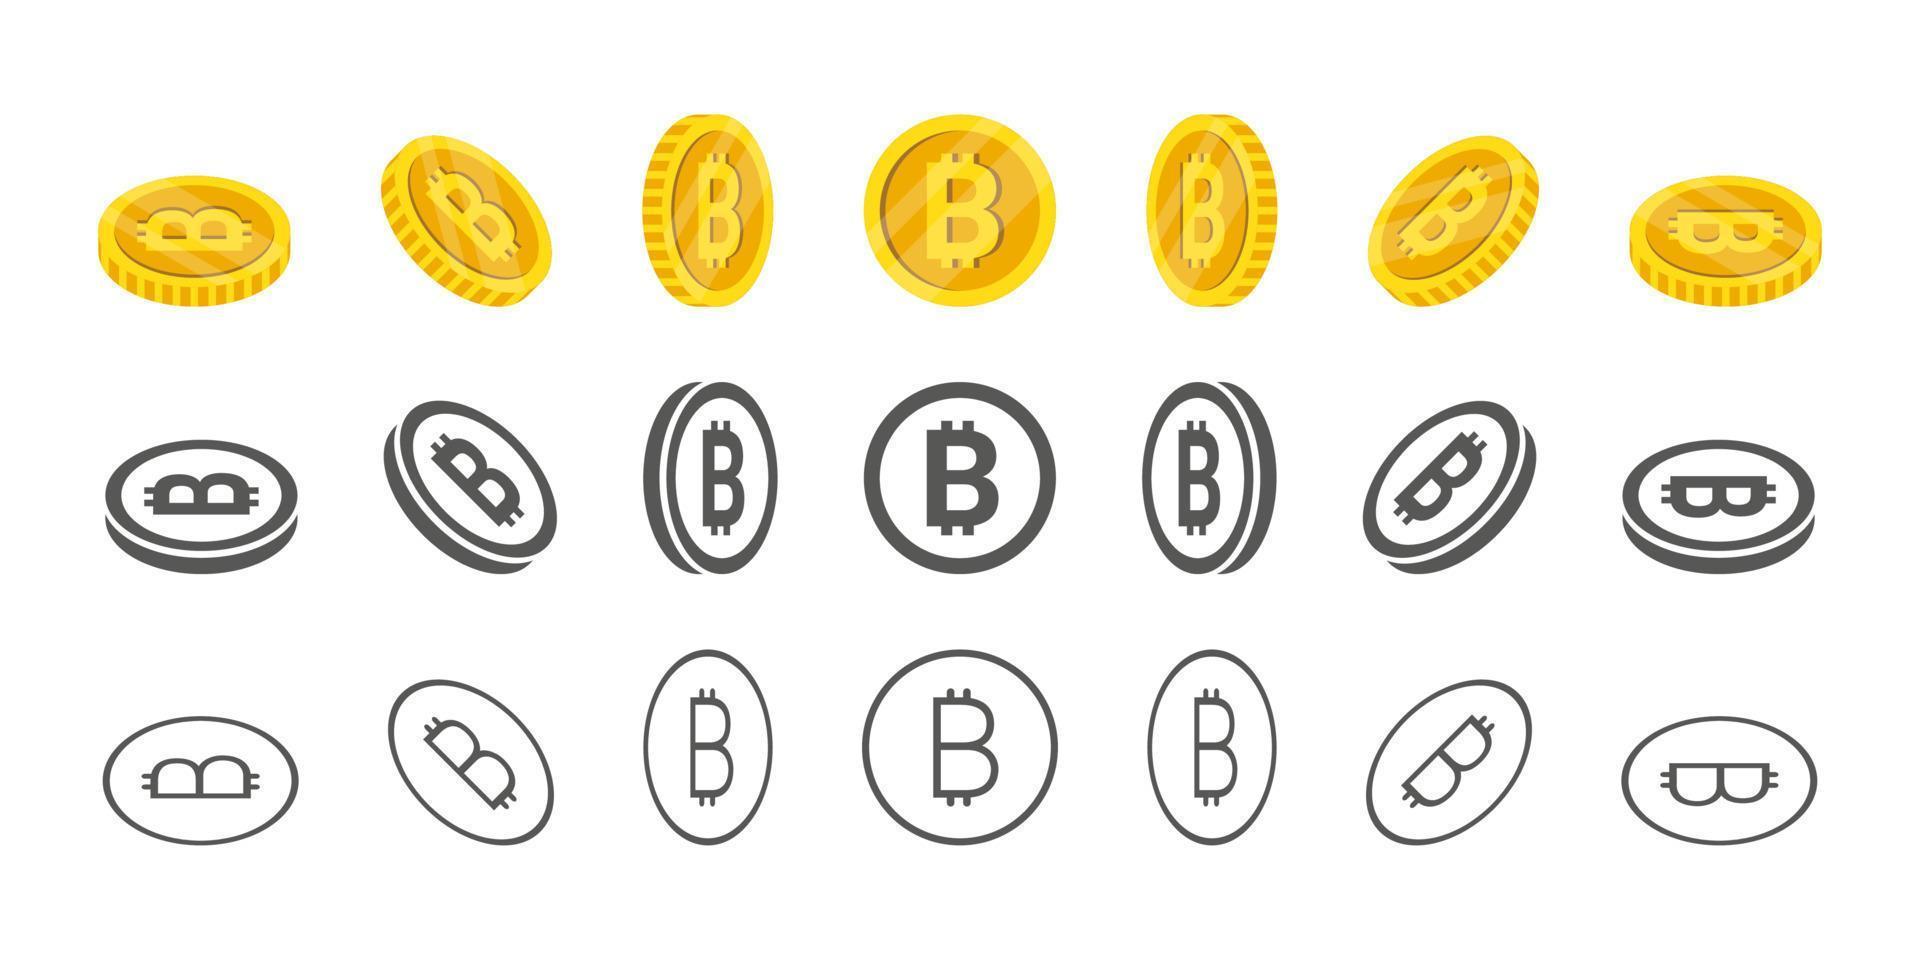 Bitcoin coins. Rotation of icons at different angles for animation. Coins in isometric. Vector illustration